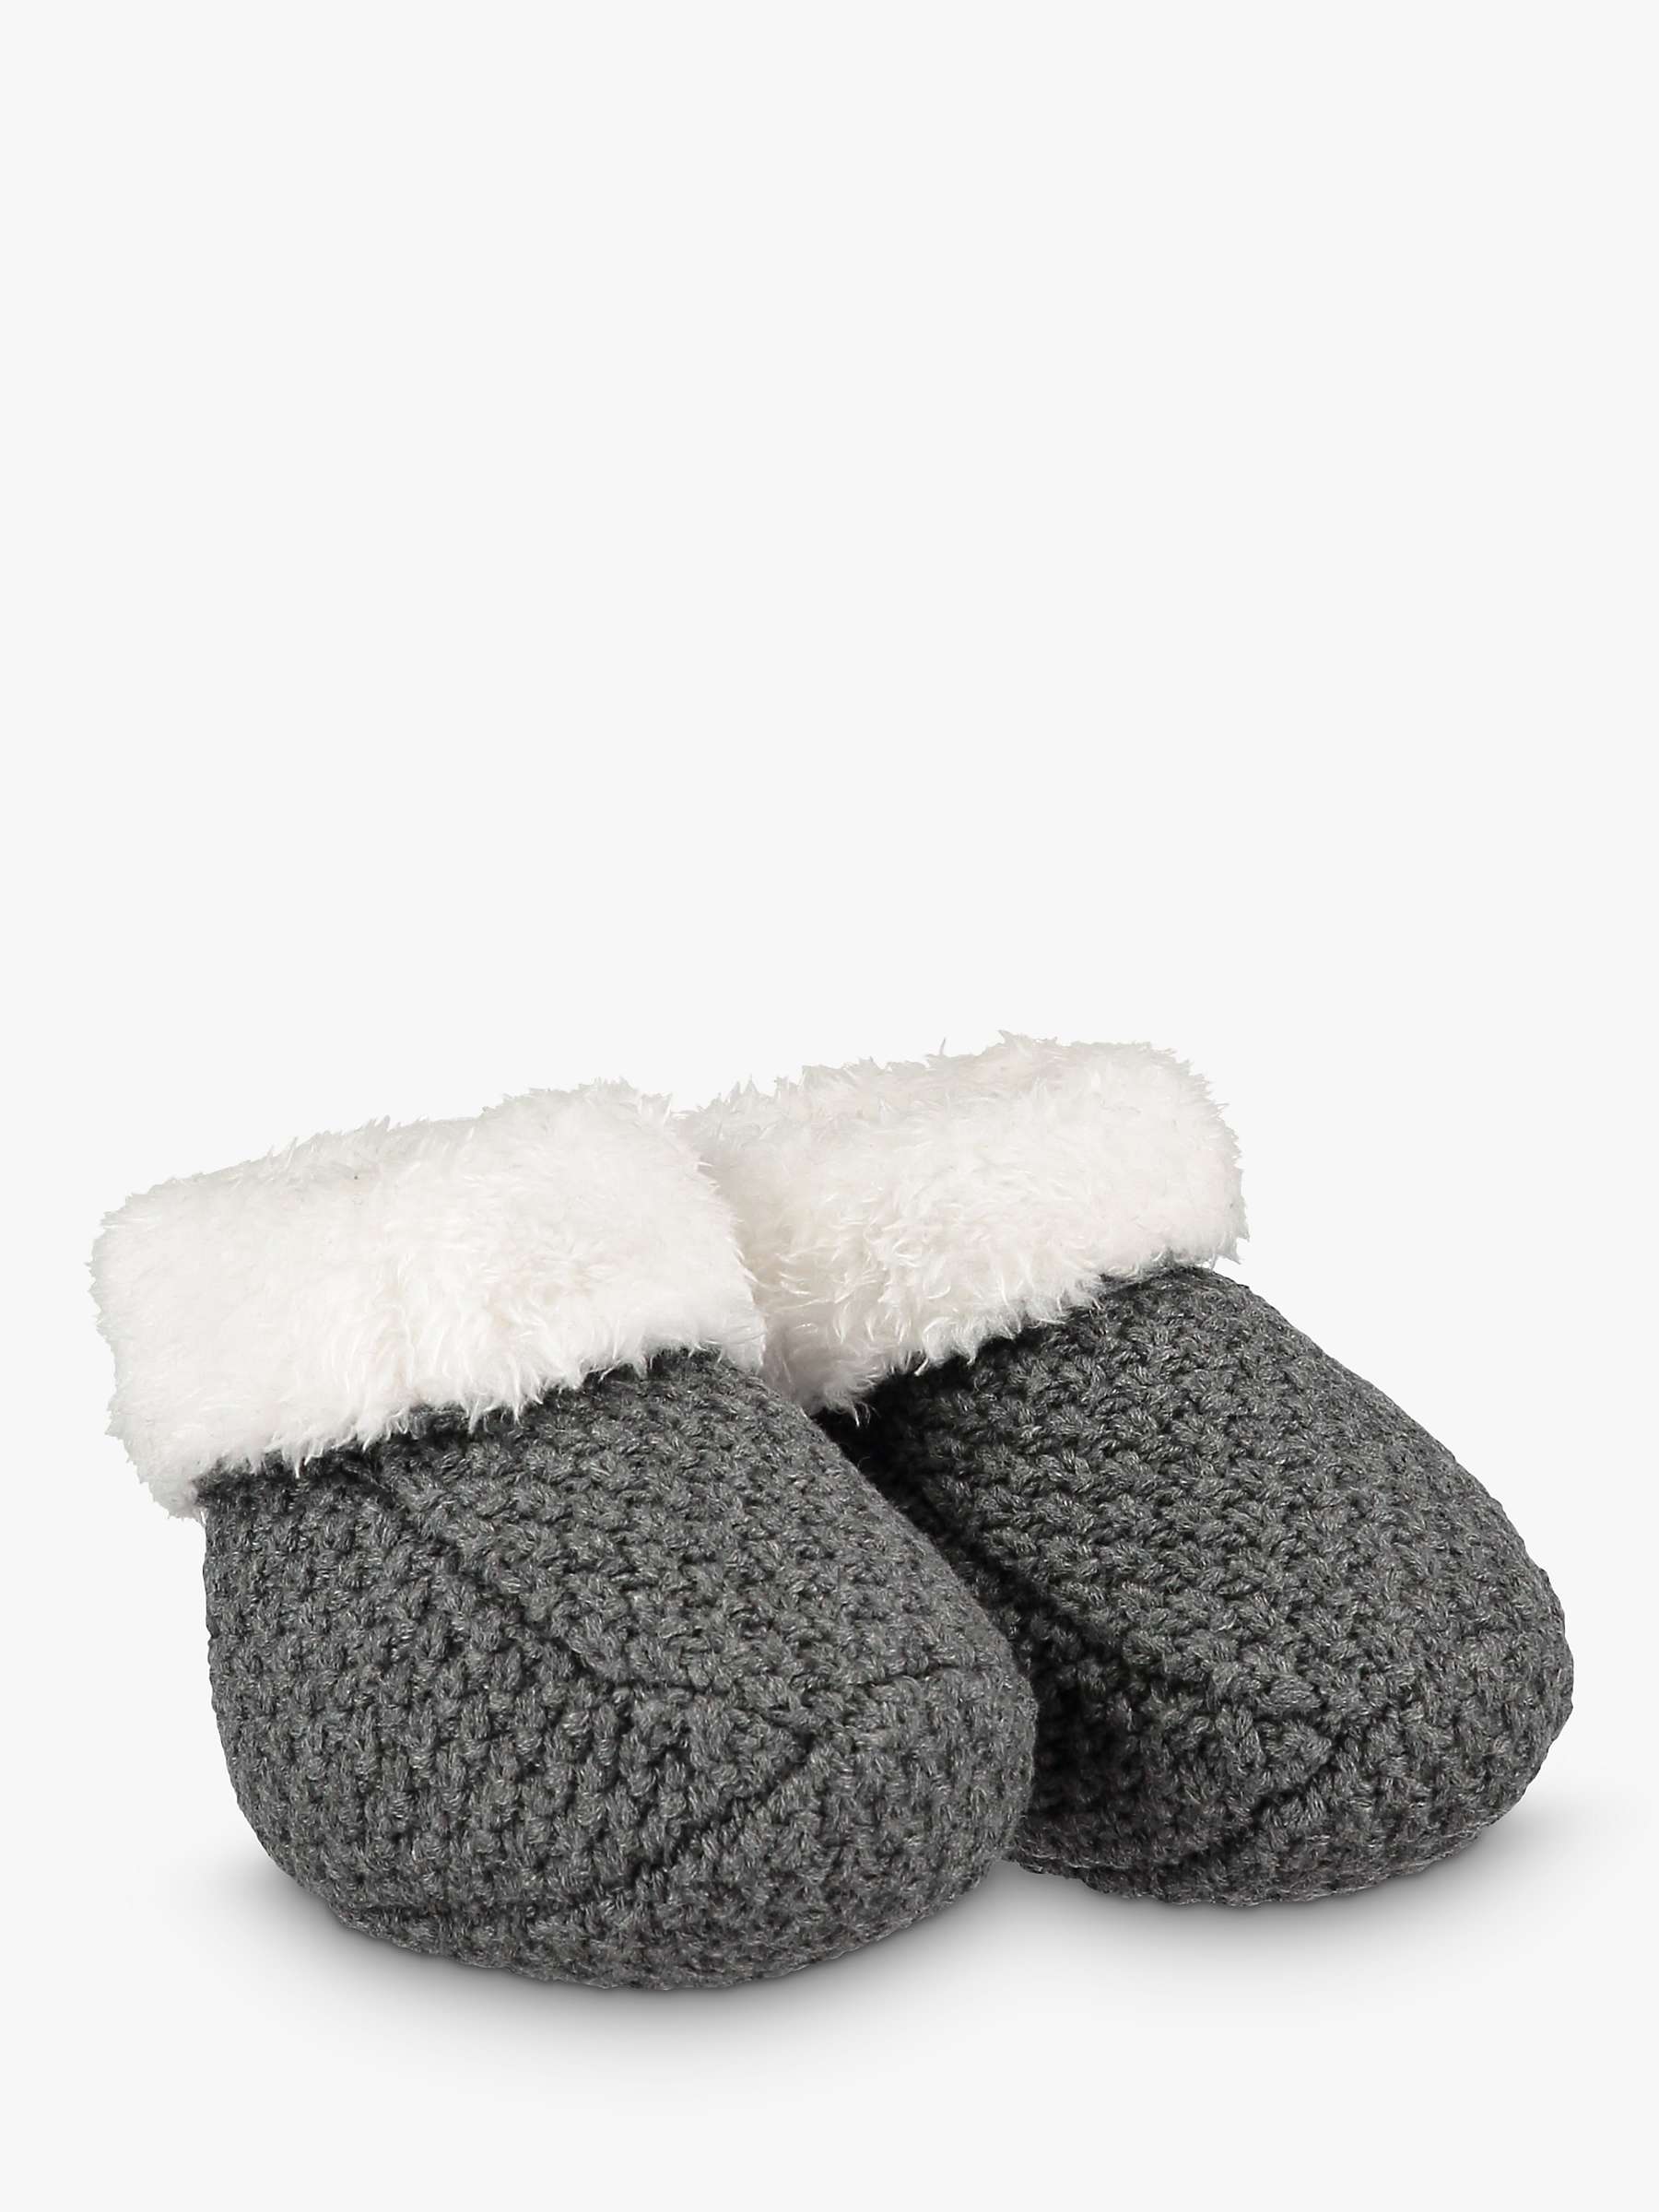 Buy The Little Tailor Baby Knitted Booties, Charcoal Grey Online at johnlewis.com